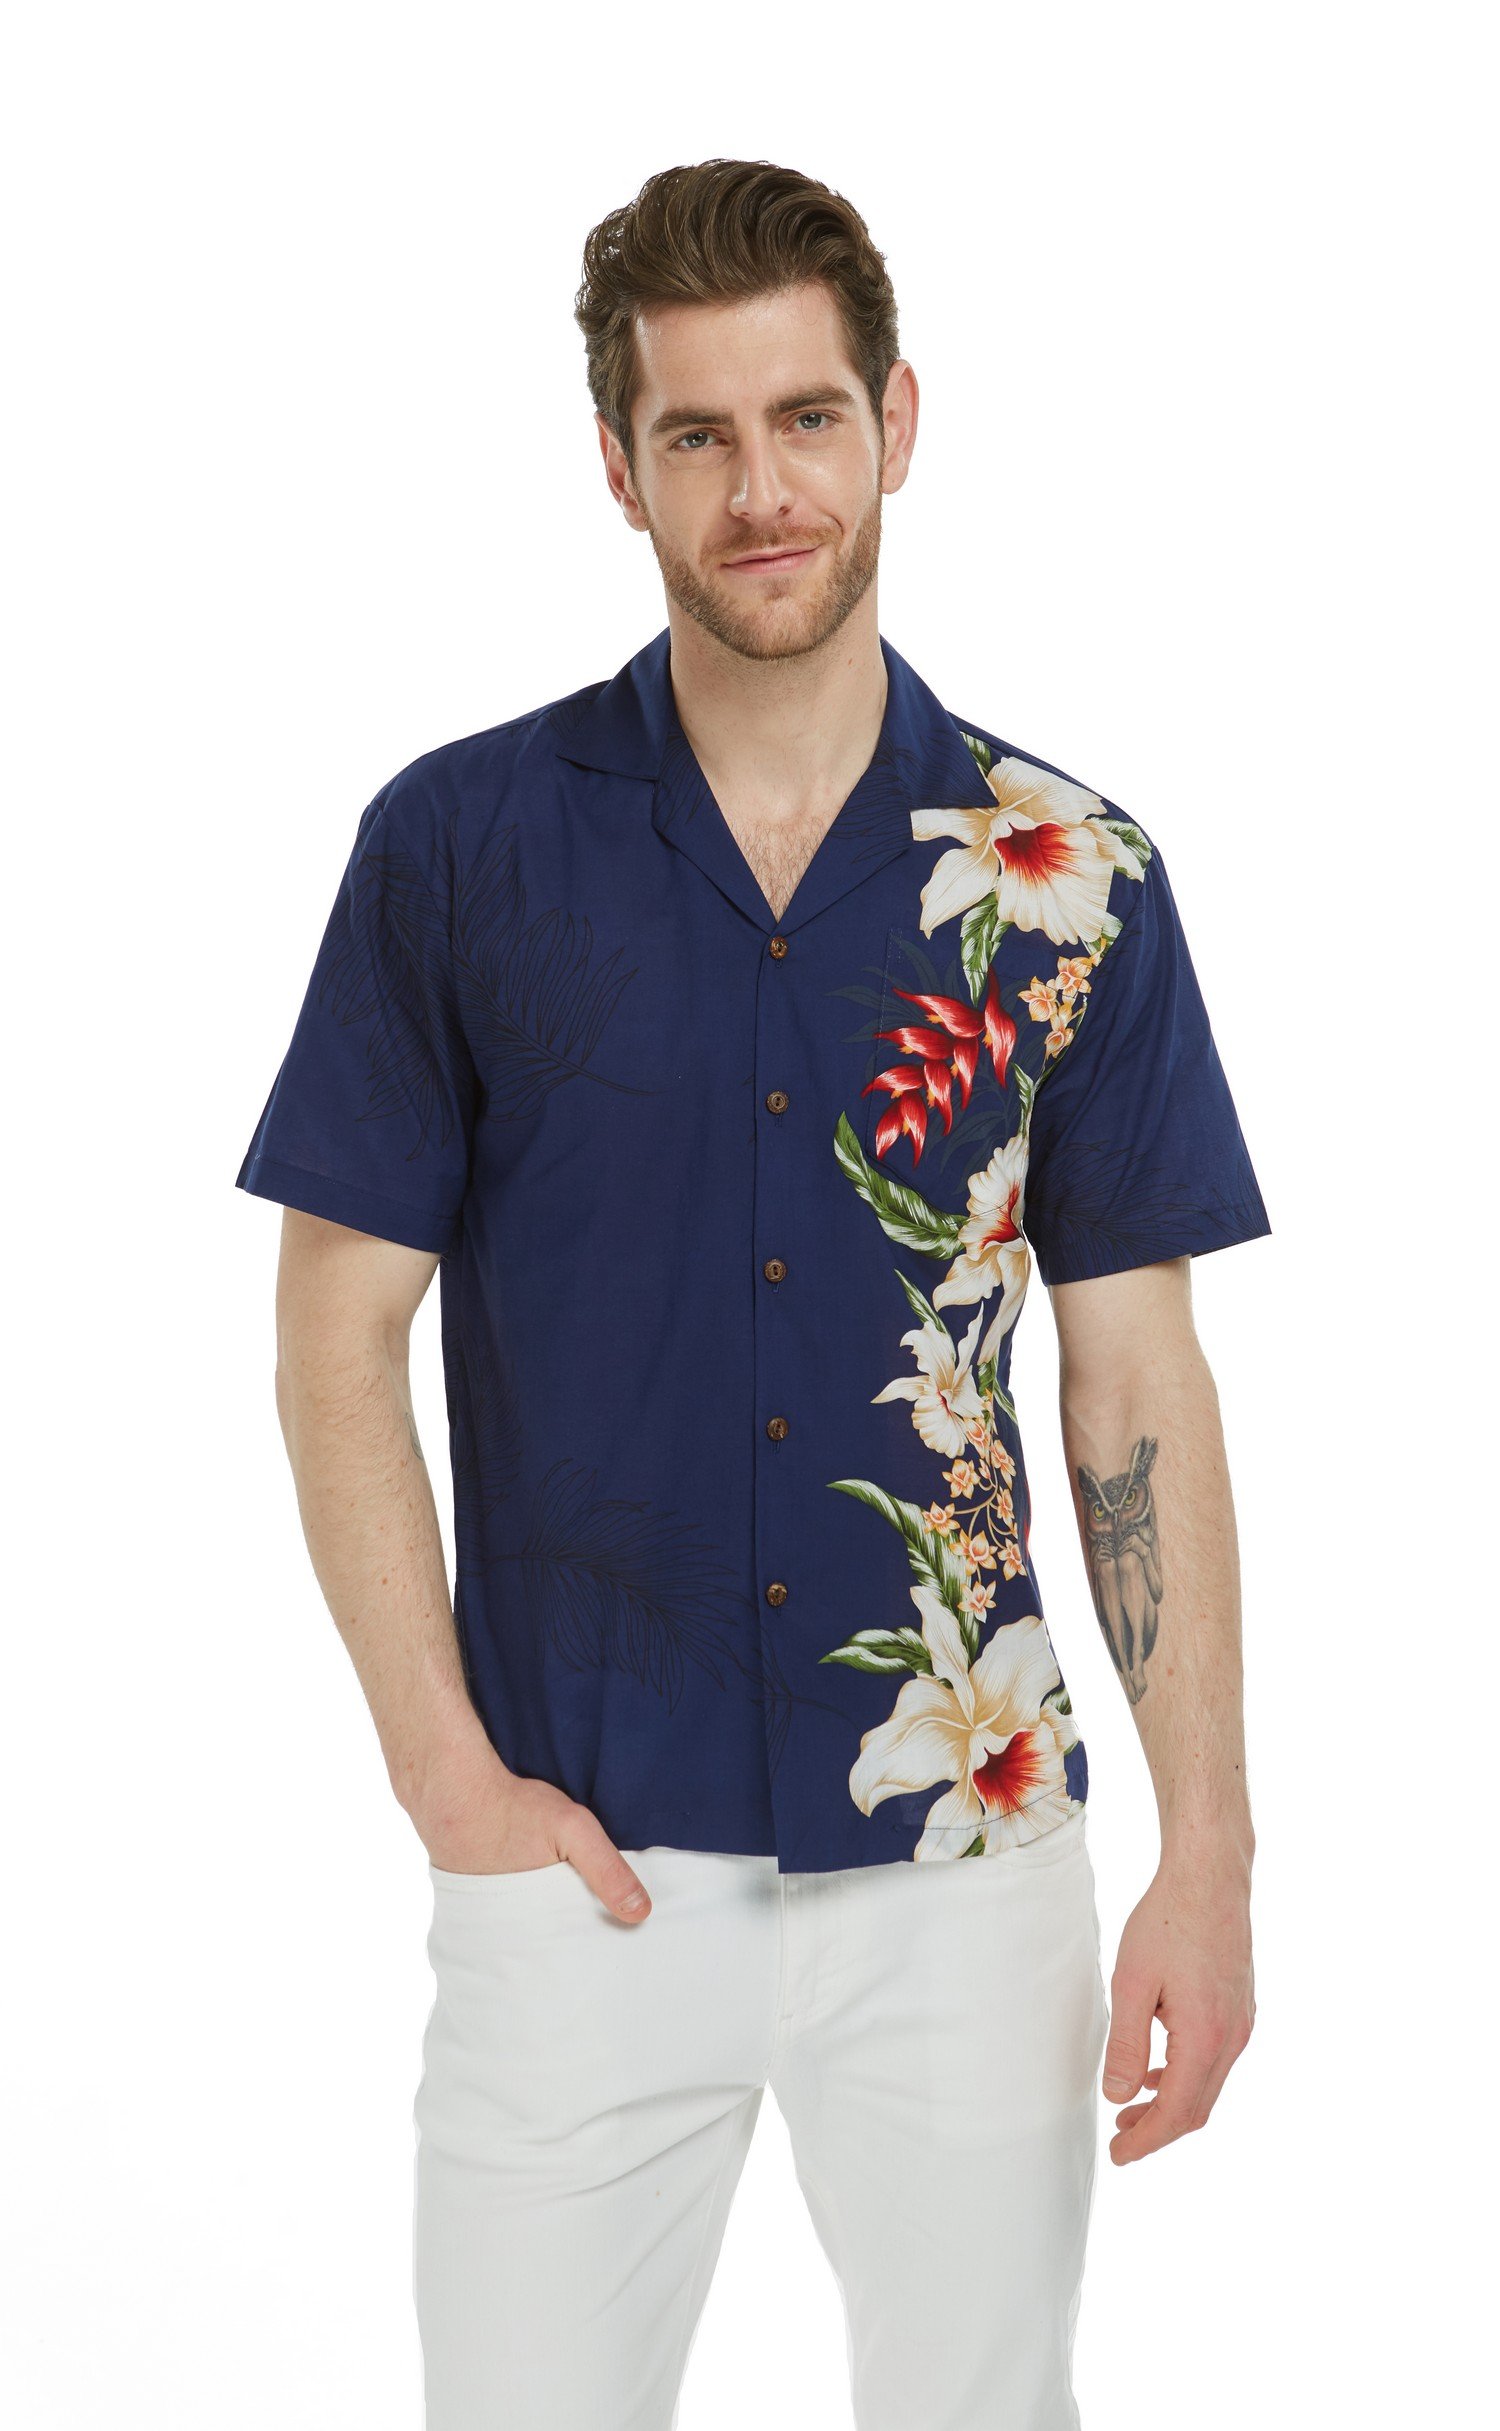 Men’s Aloha Shirt Side Rafelsia Orchid Floral in Navy – Jasaust Store